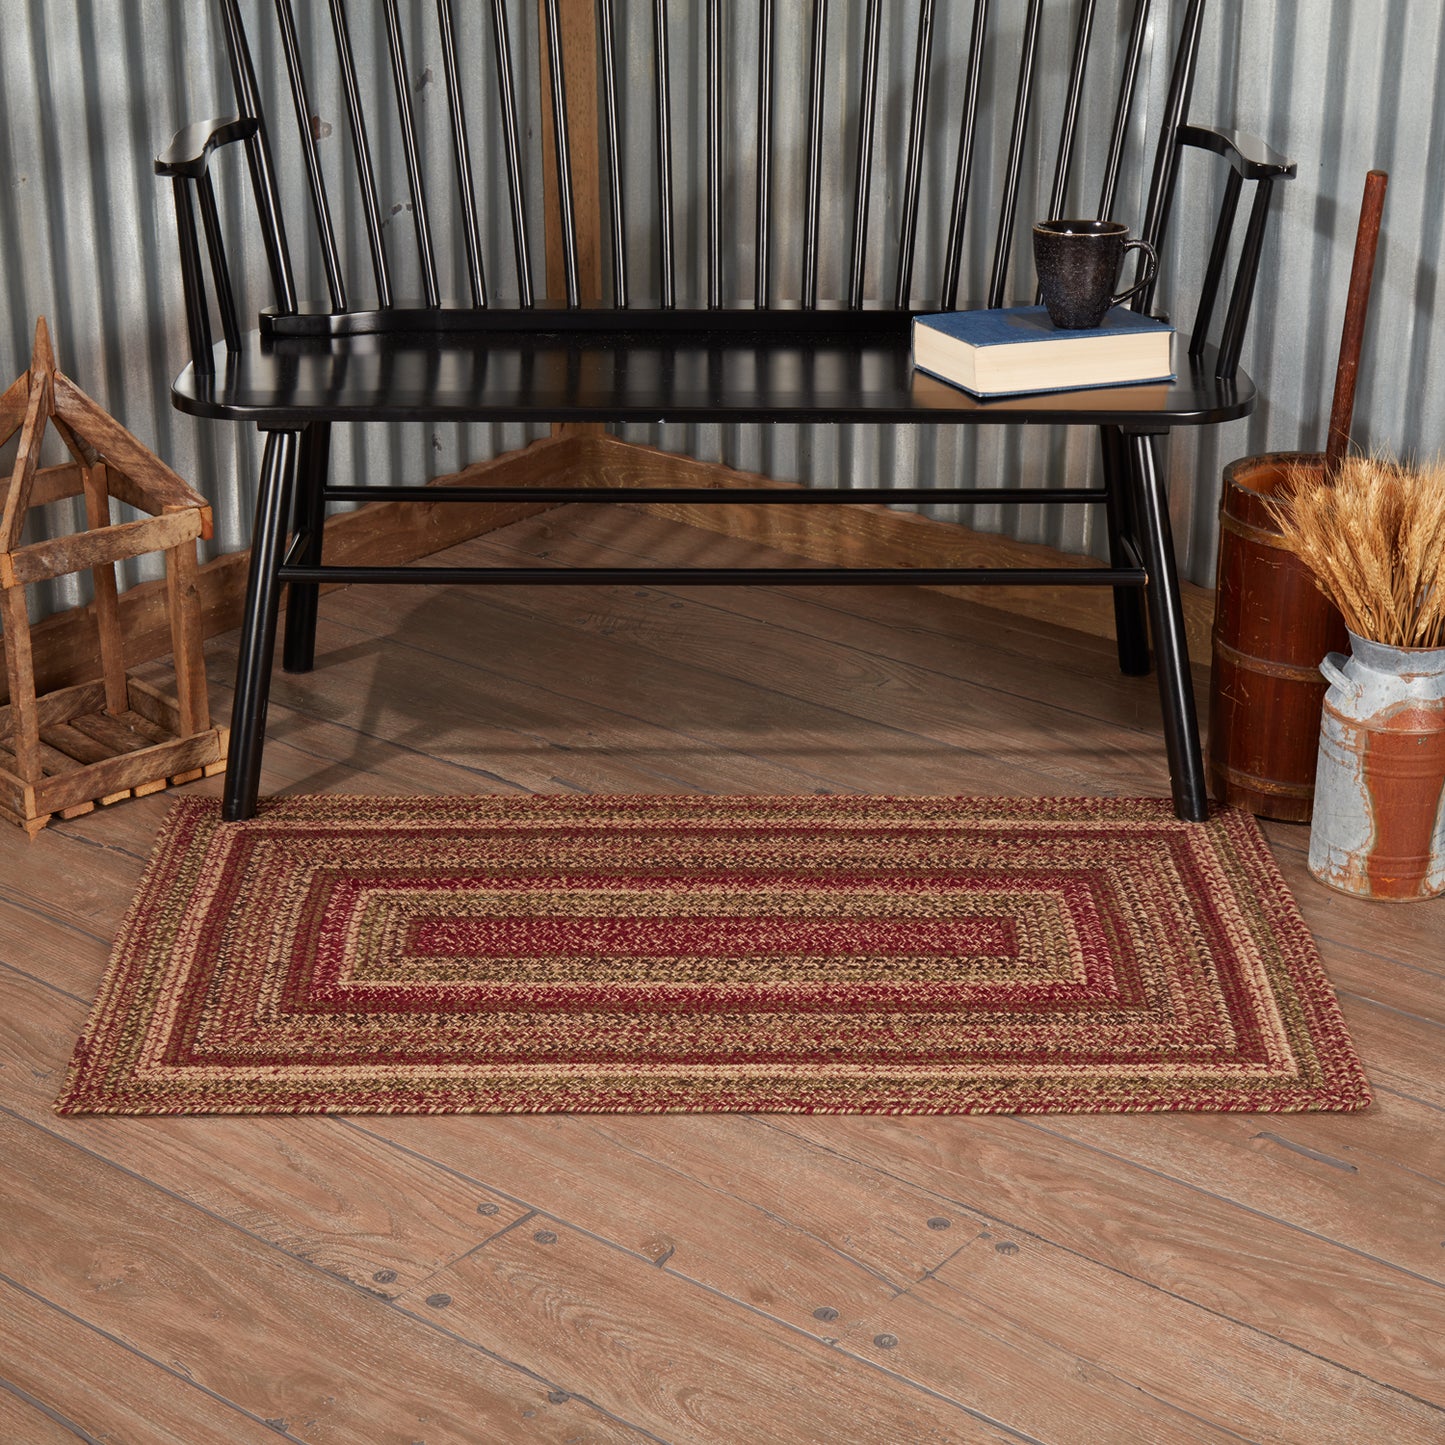 69448-Cider-Mill-Jute-Rug-Rect-w-Pad-27x48-image-4